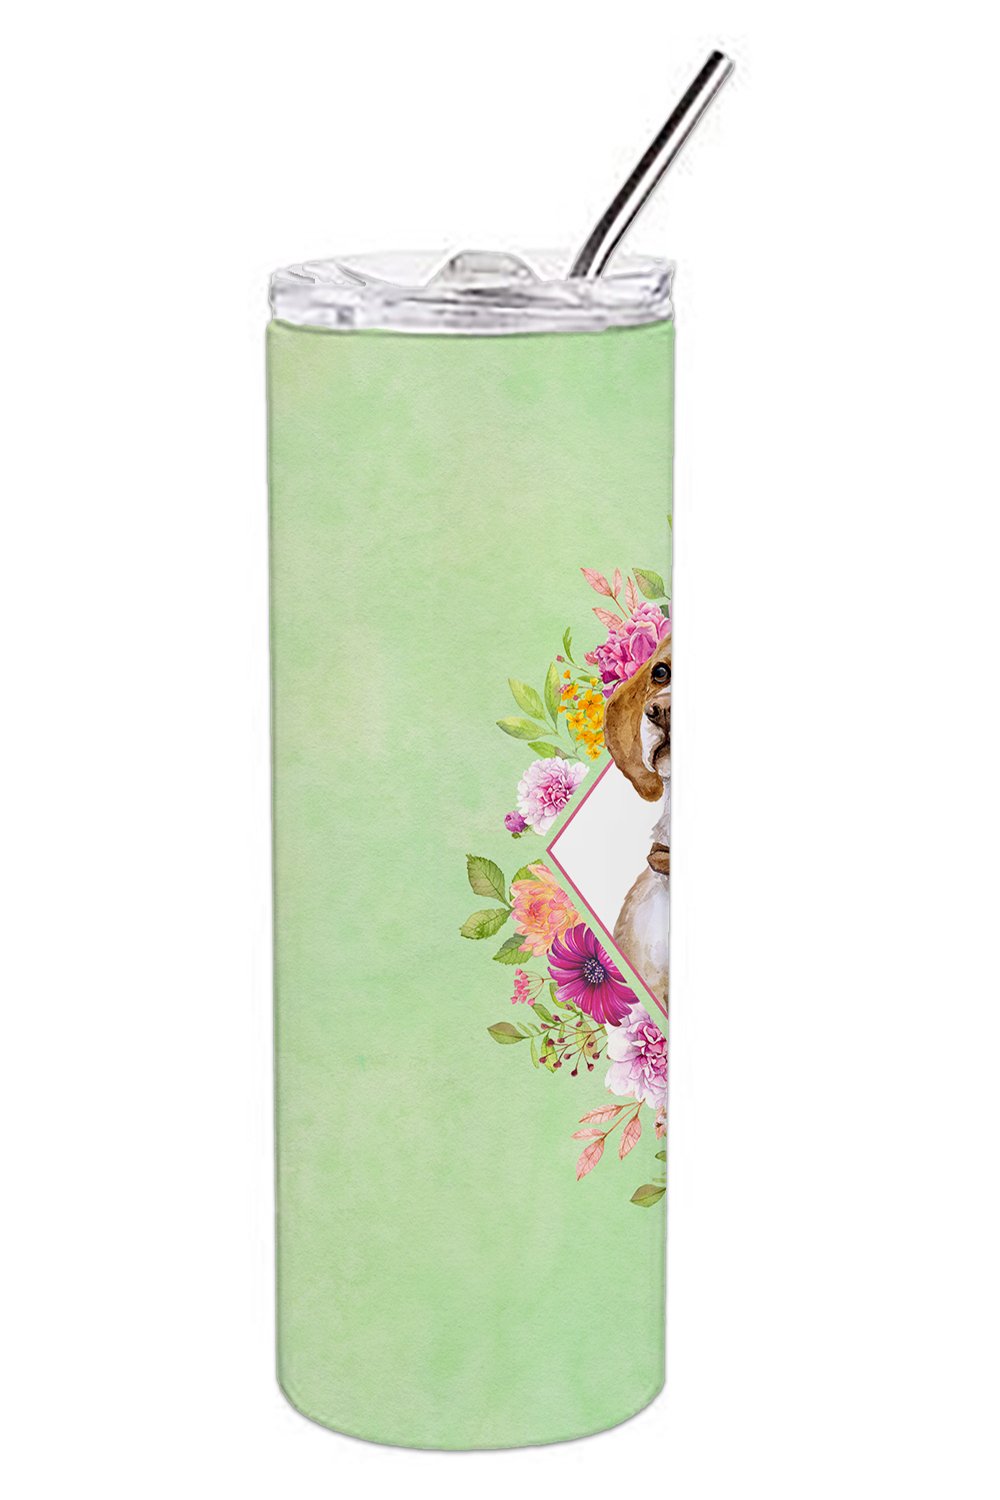 Beagle Green Flowers Double Walled Stainless Steel 20 oz Skinny Tumbler CK4277TBL20 by Caroline's Treasures